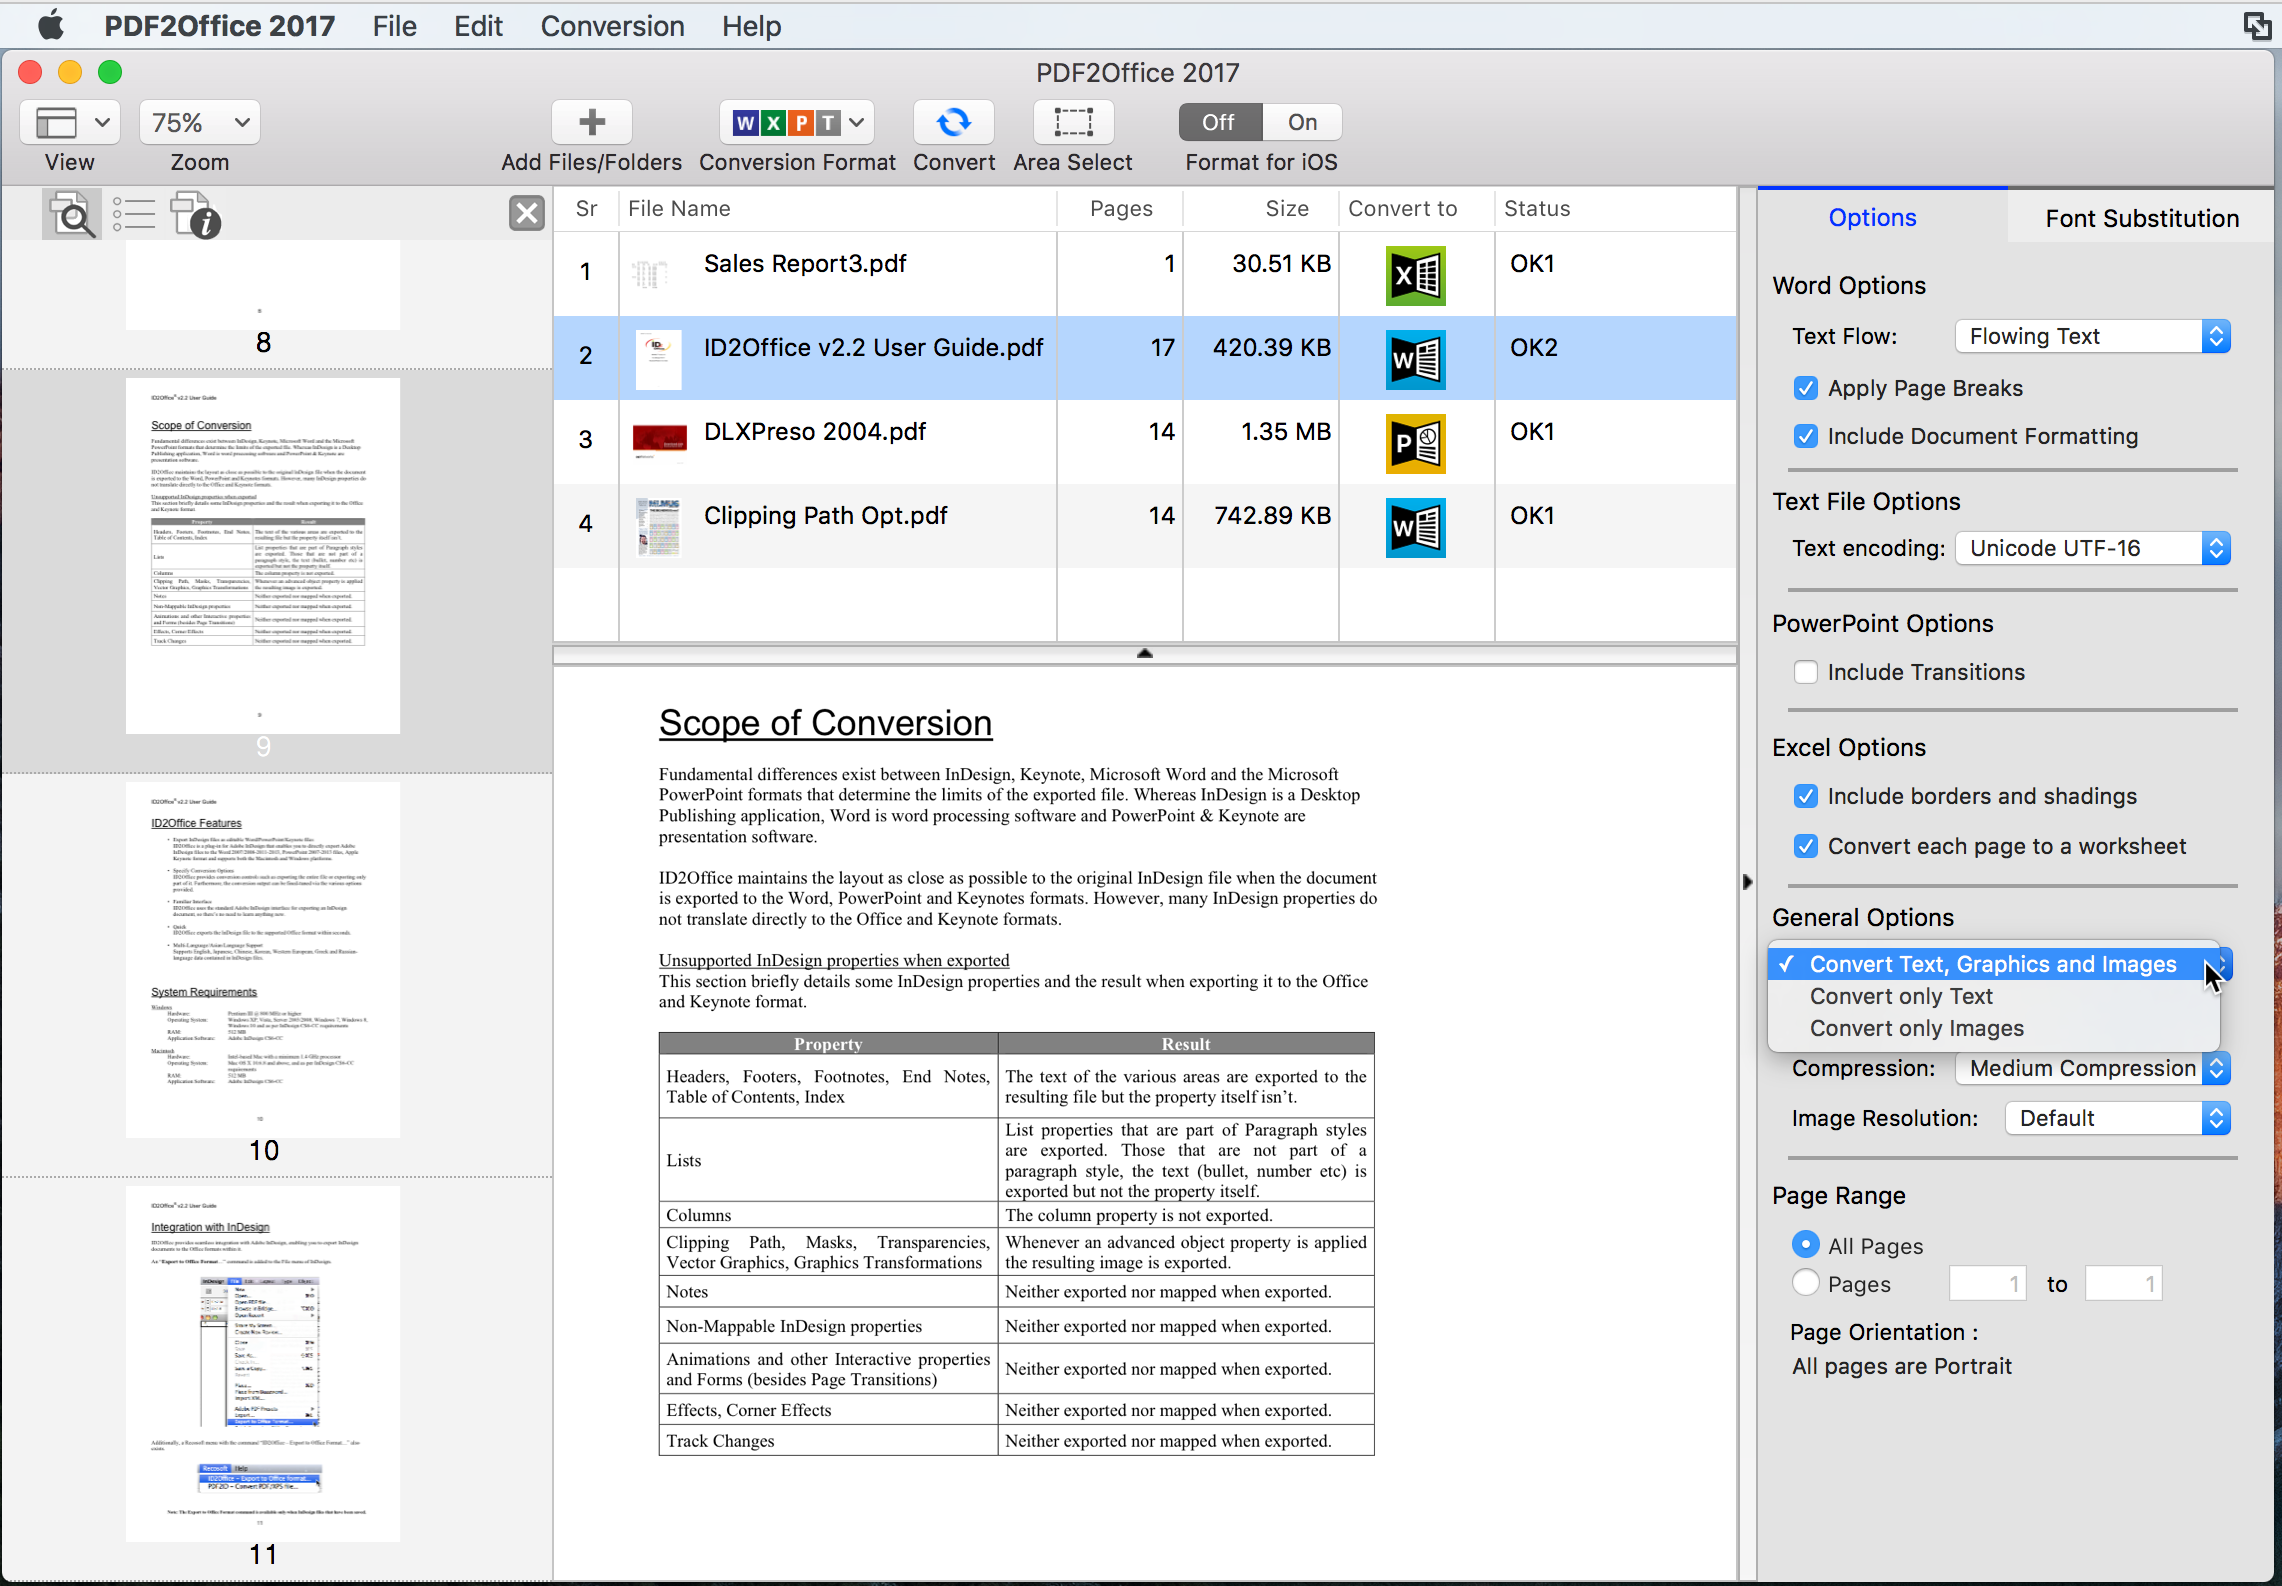 You can edit the PDF in Microsoft Word after converting the filec